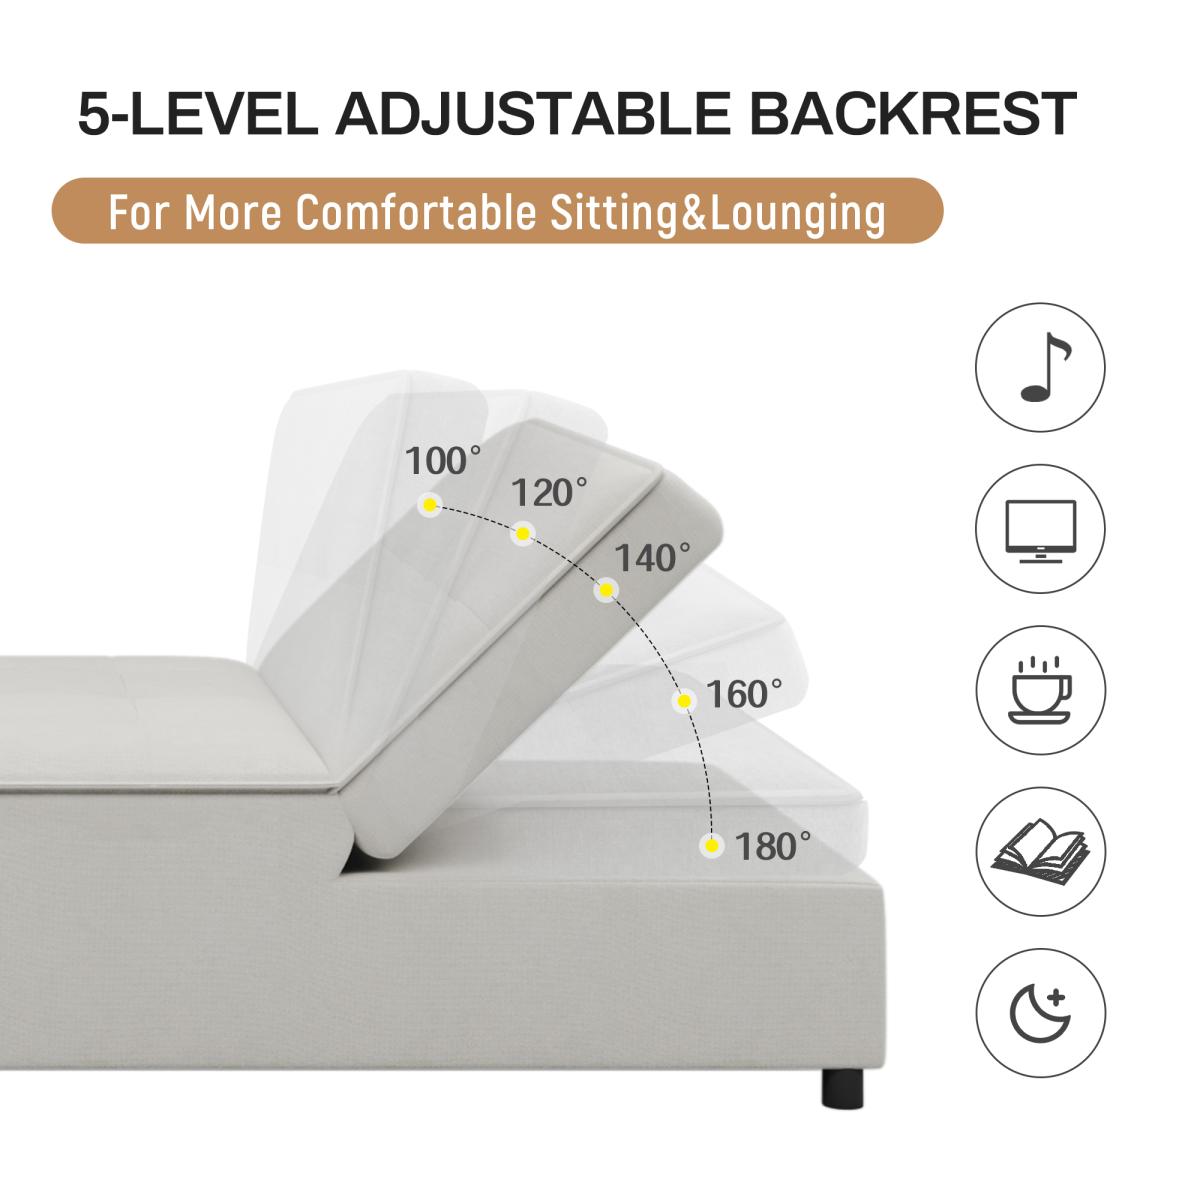 4-in-1 Sofa Bed, Chair Bed, Multi-Function Folding Ottoman Bed with Storage Pocket and Usb Port for Small Room Apartment,Living Room,Bedroom,Hallway,White